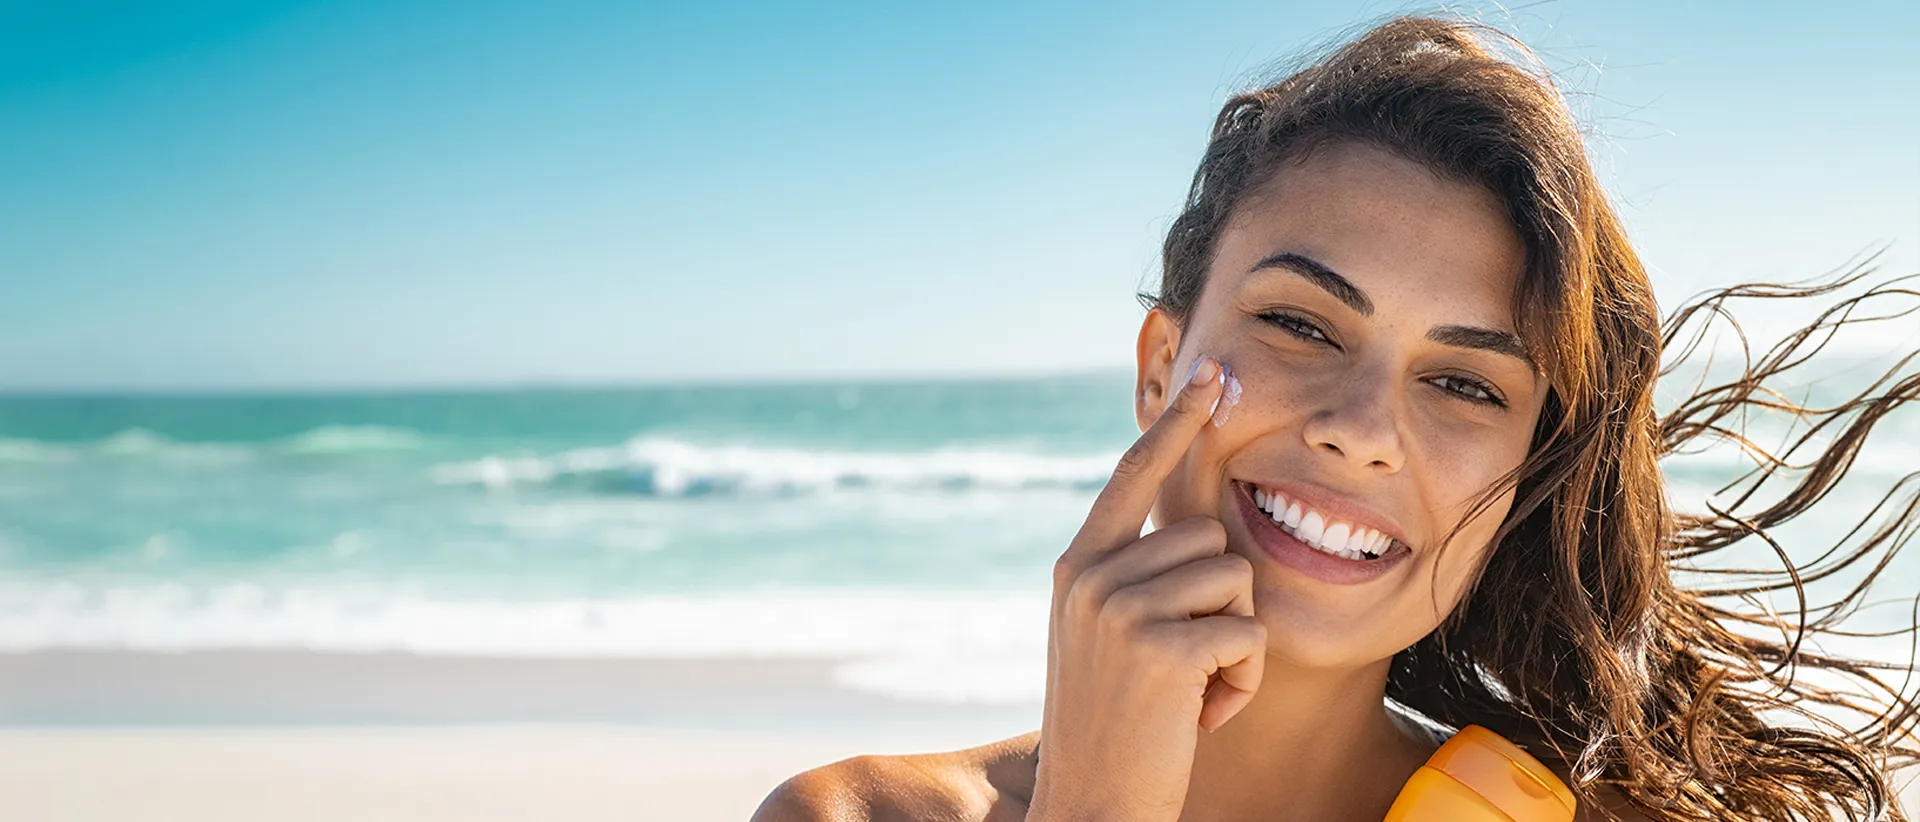 Best Summer Skin Care Tips for Oily and Dry Skin